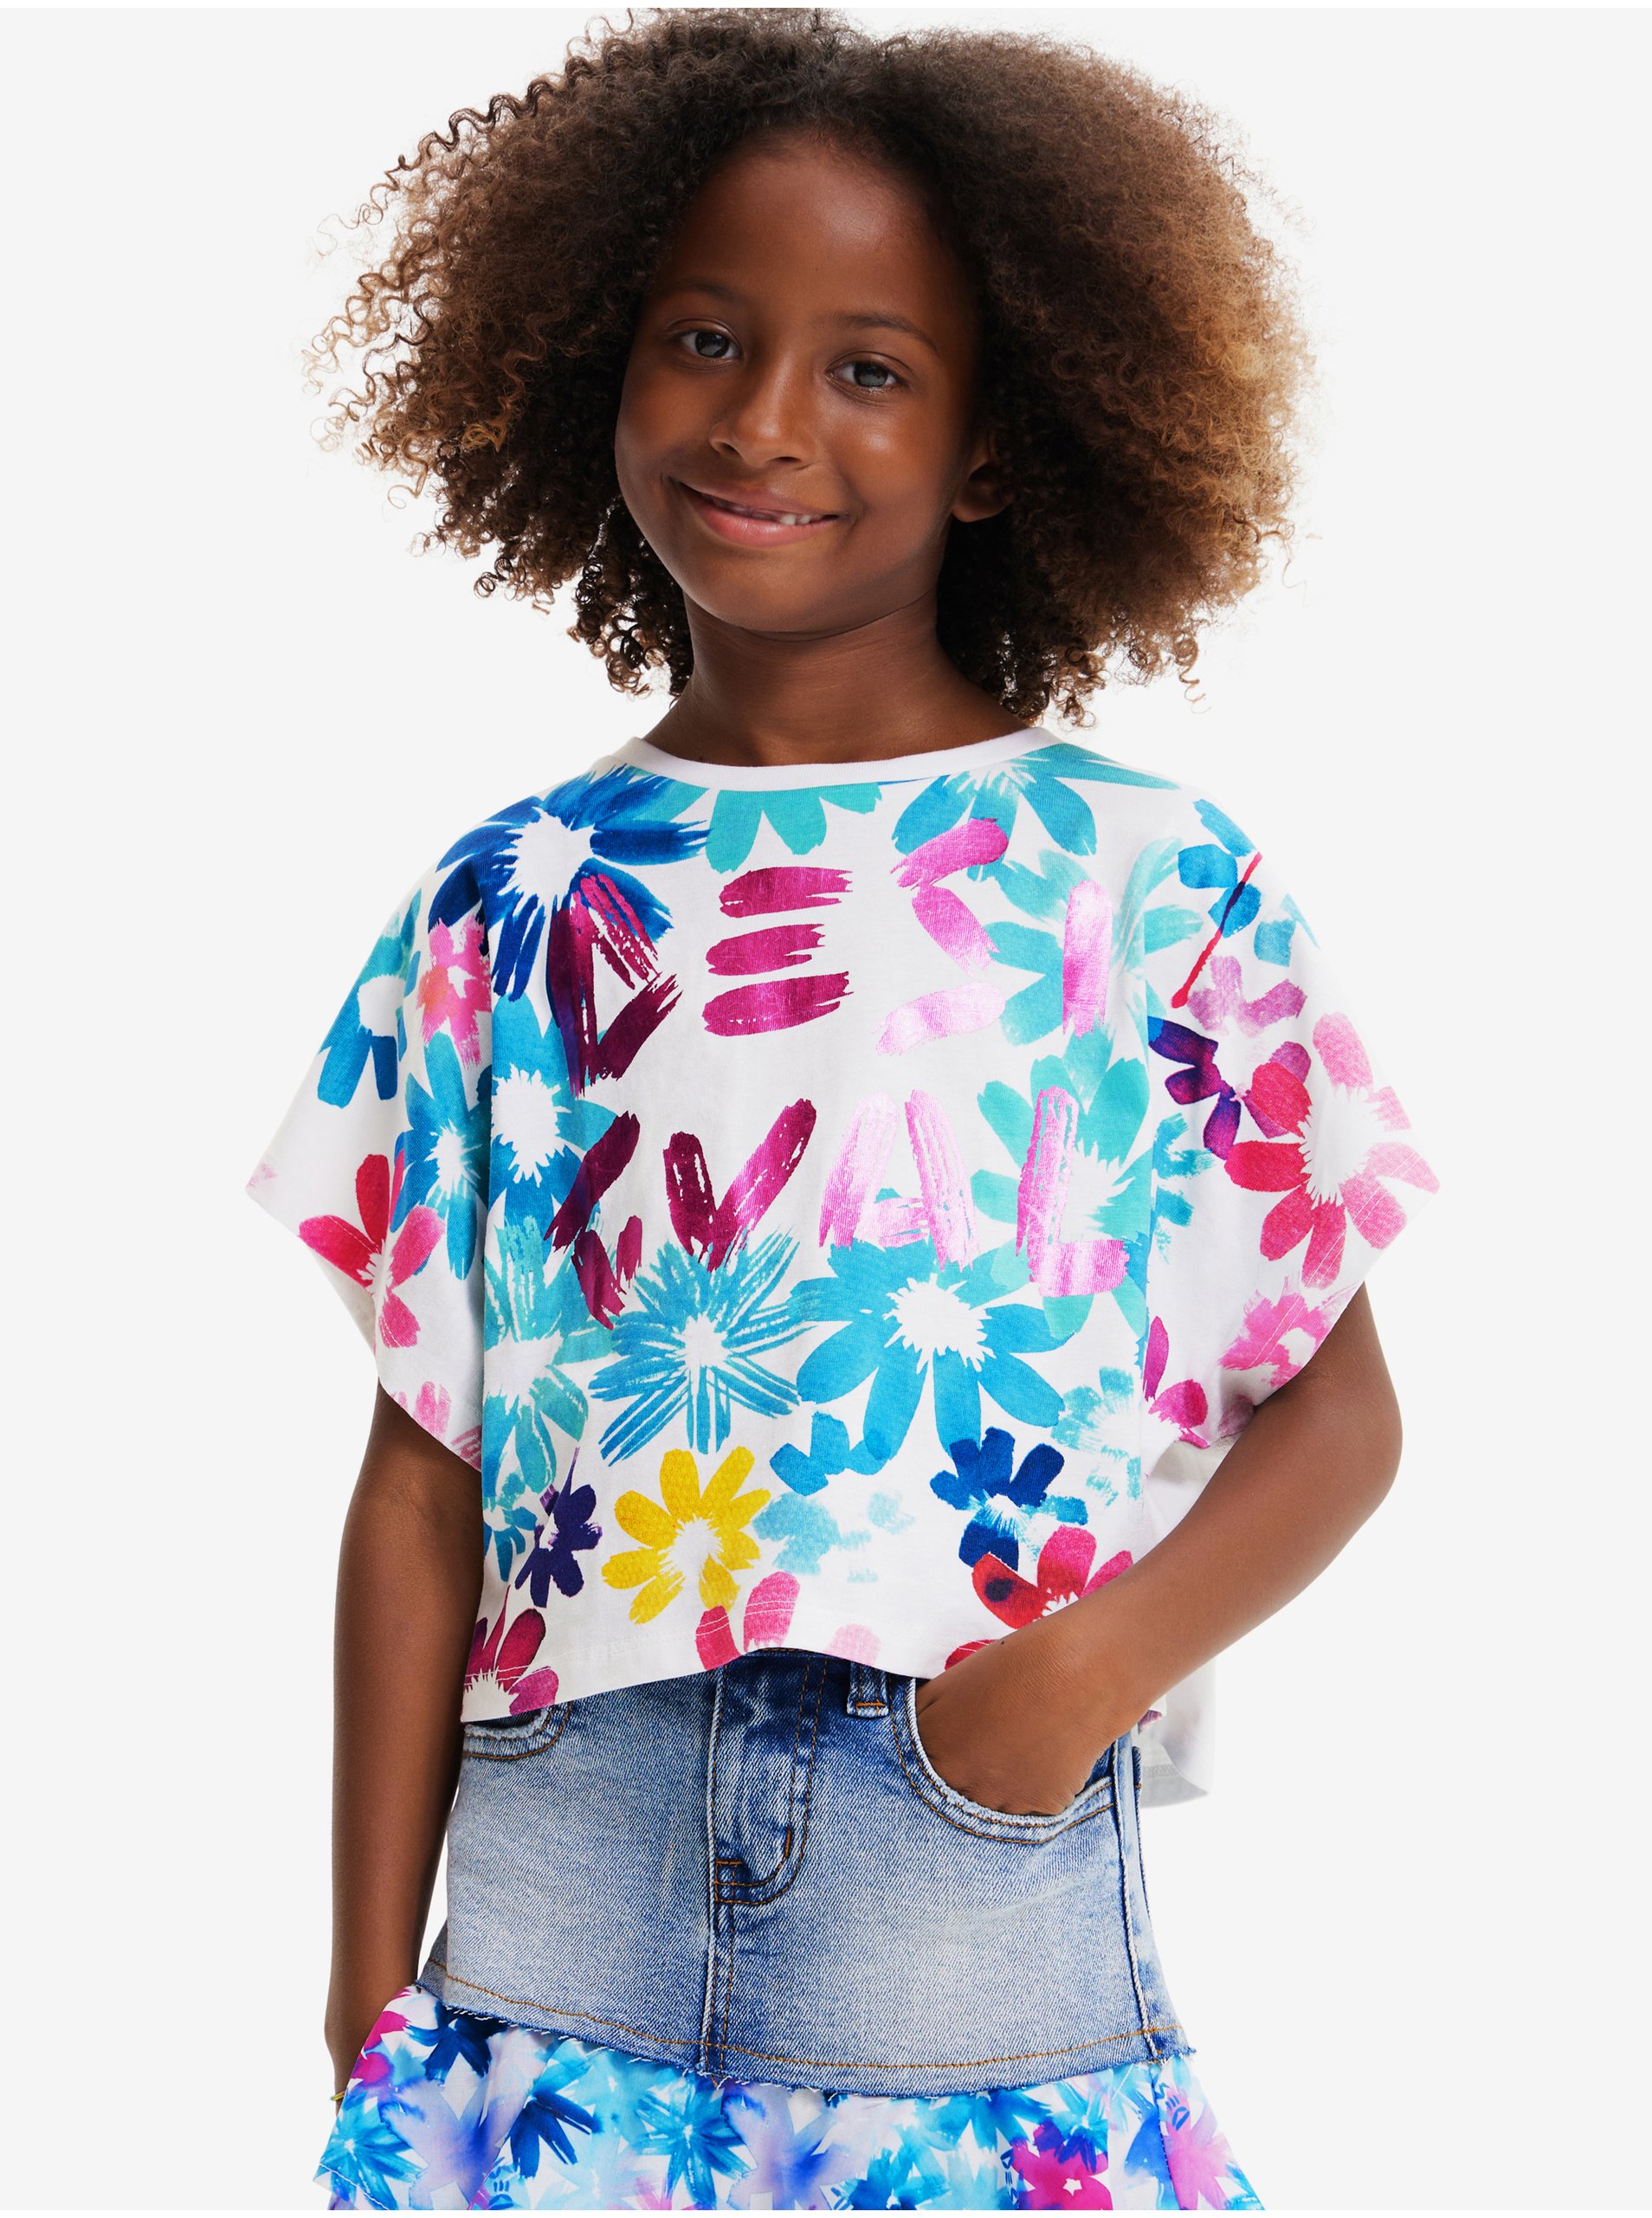 Blue and white girly floral T-shirt Desigual Biscuit - Girls